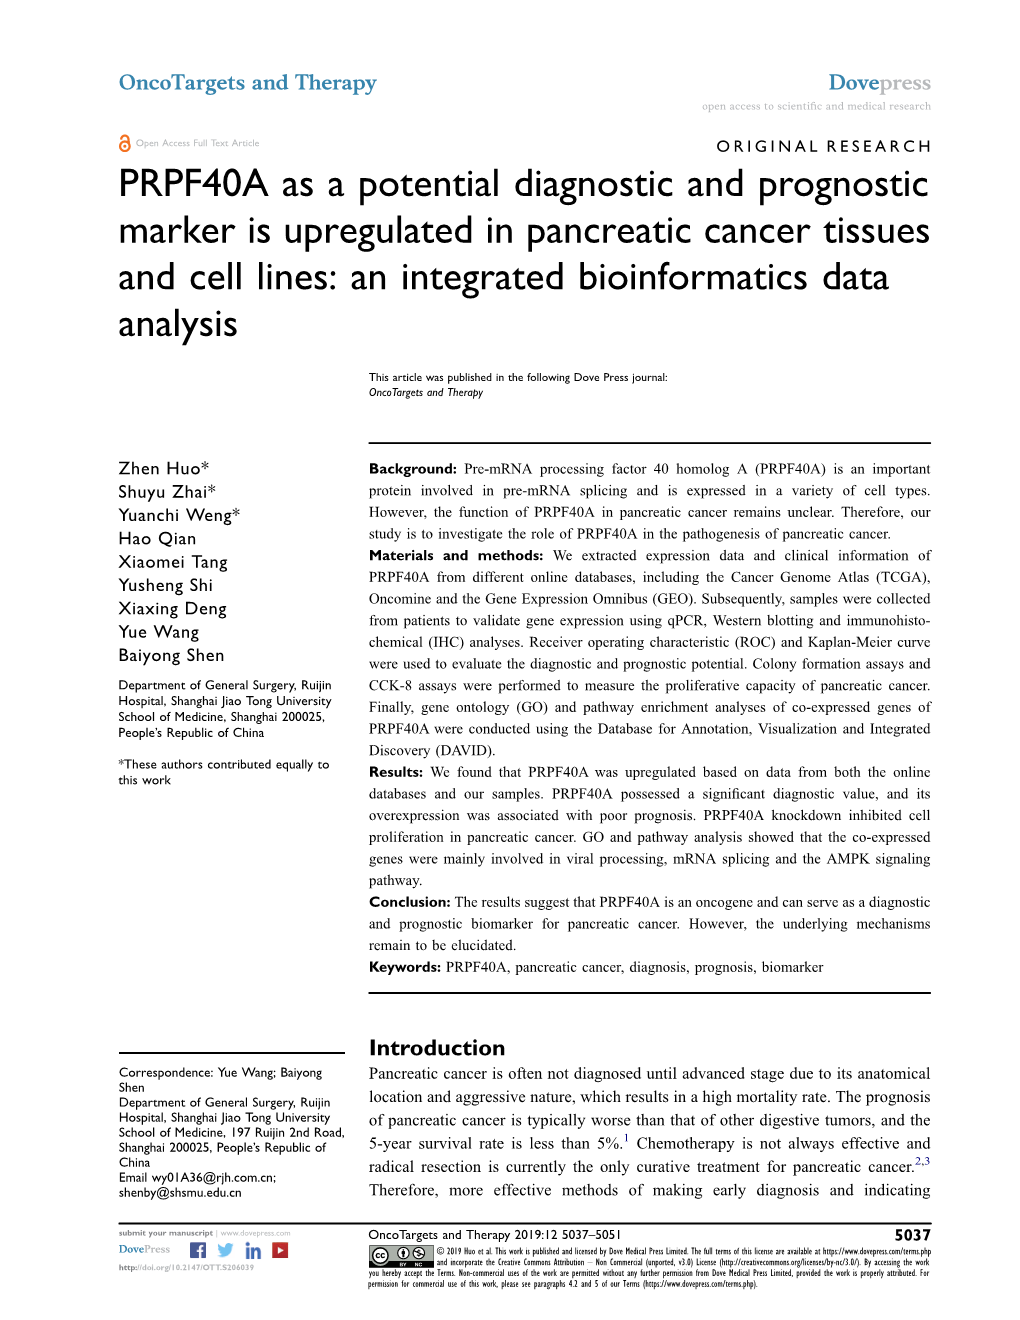 PRPF40A As a Potential Diagnostic and Prognostic Marker Is Upregulated in Pancreatic Cancer Tissues and Cell Lines: an Integrated Bioinformatics Data Analysis